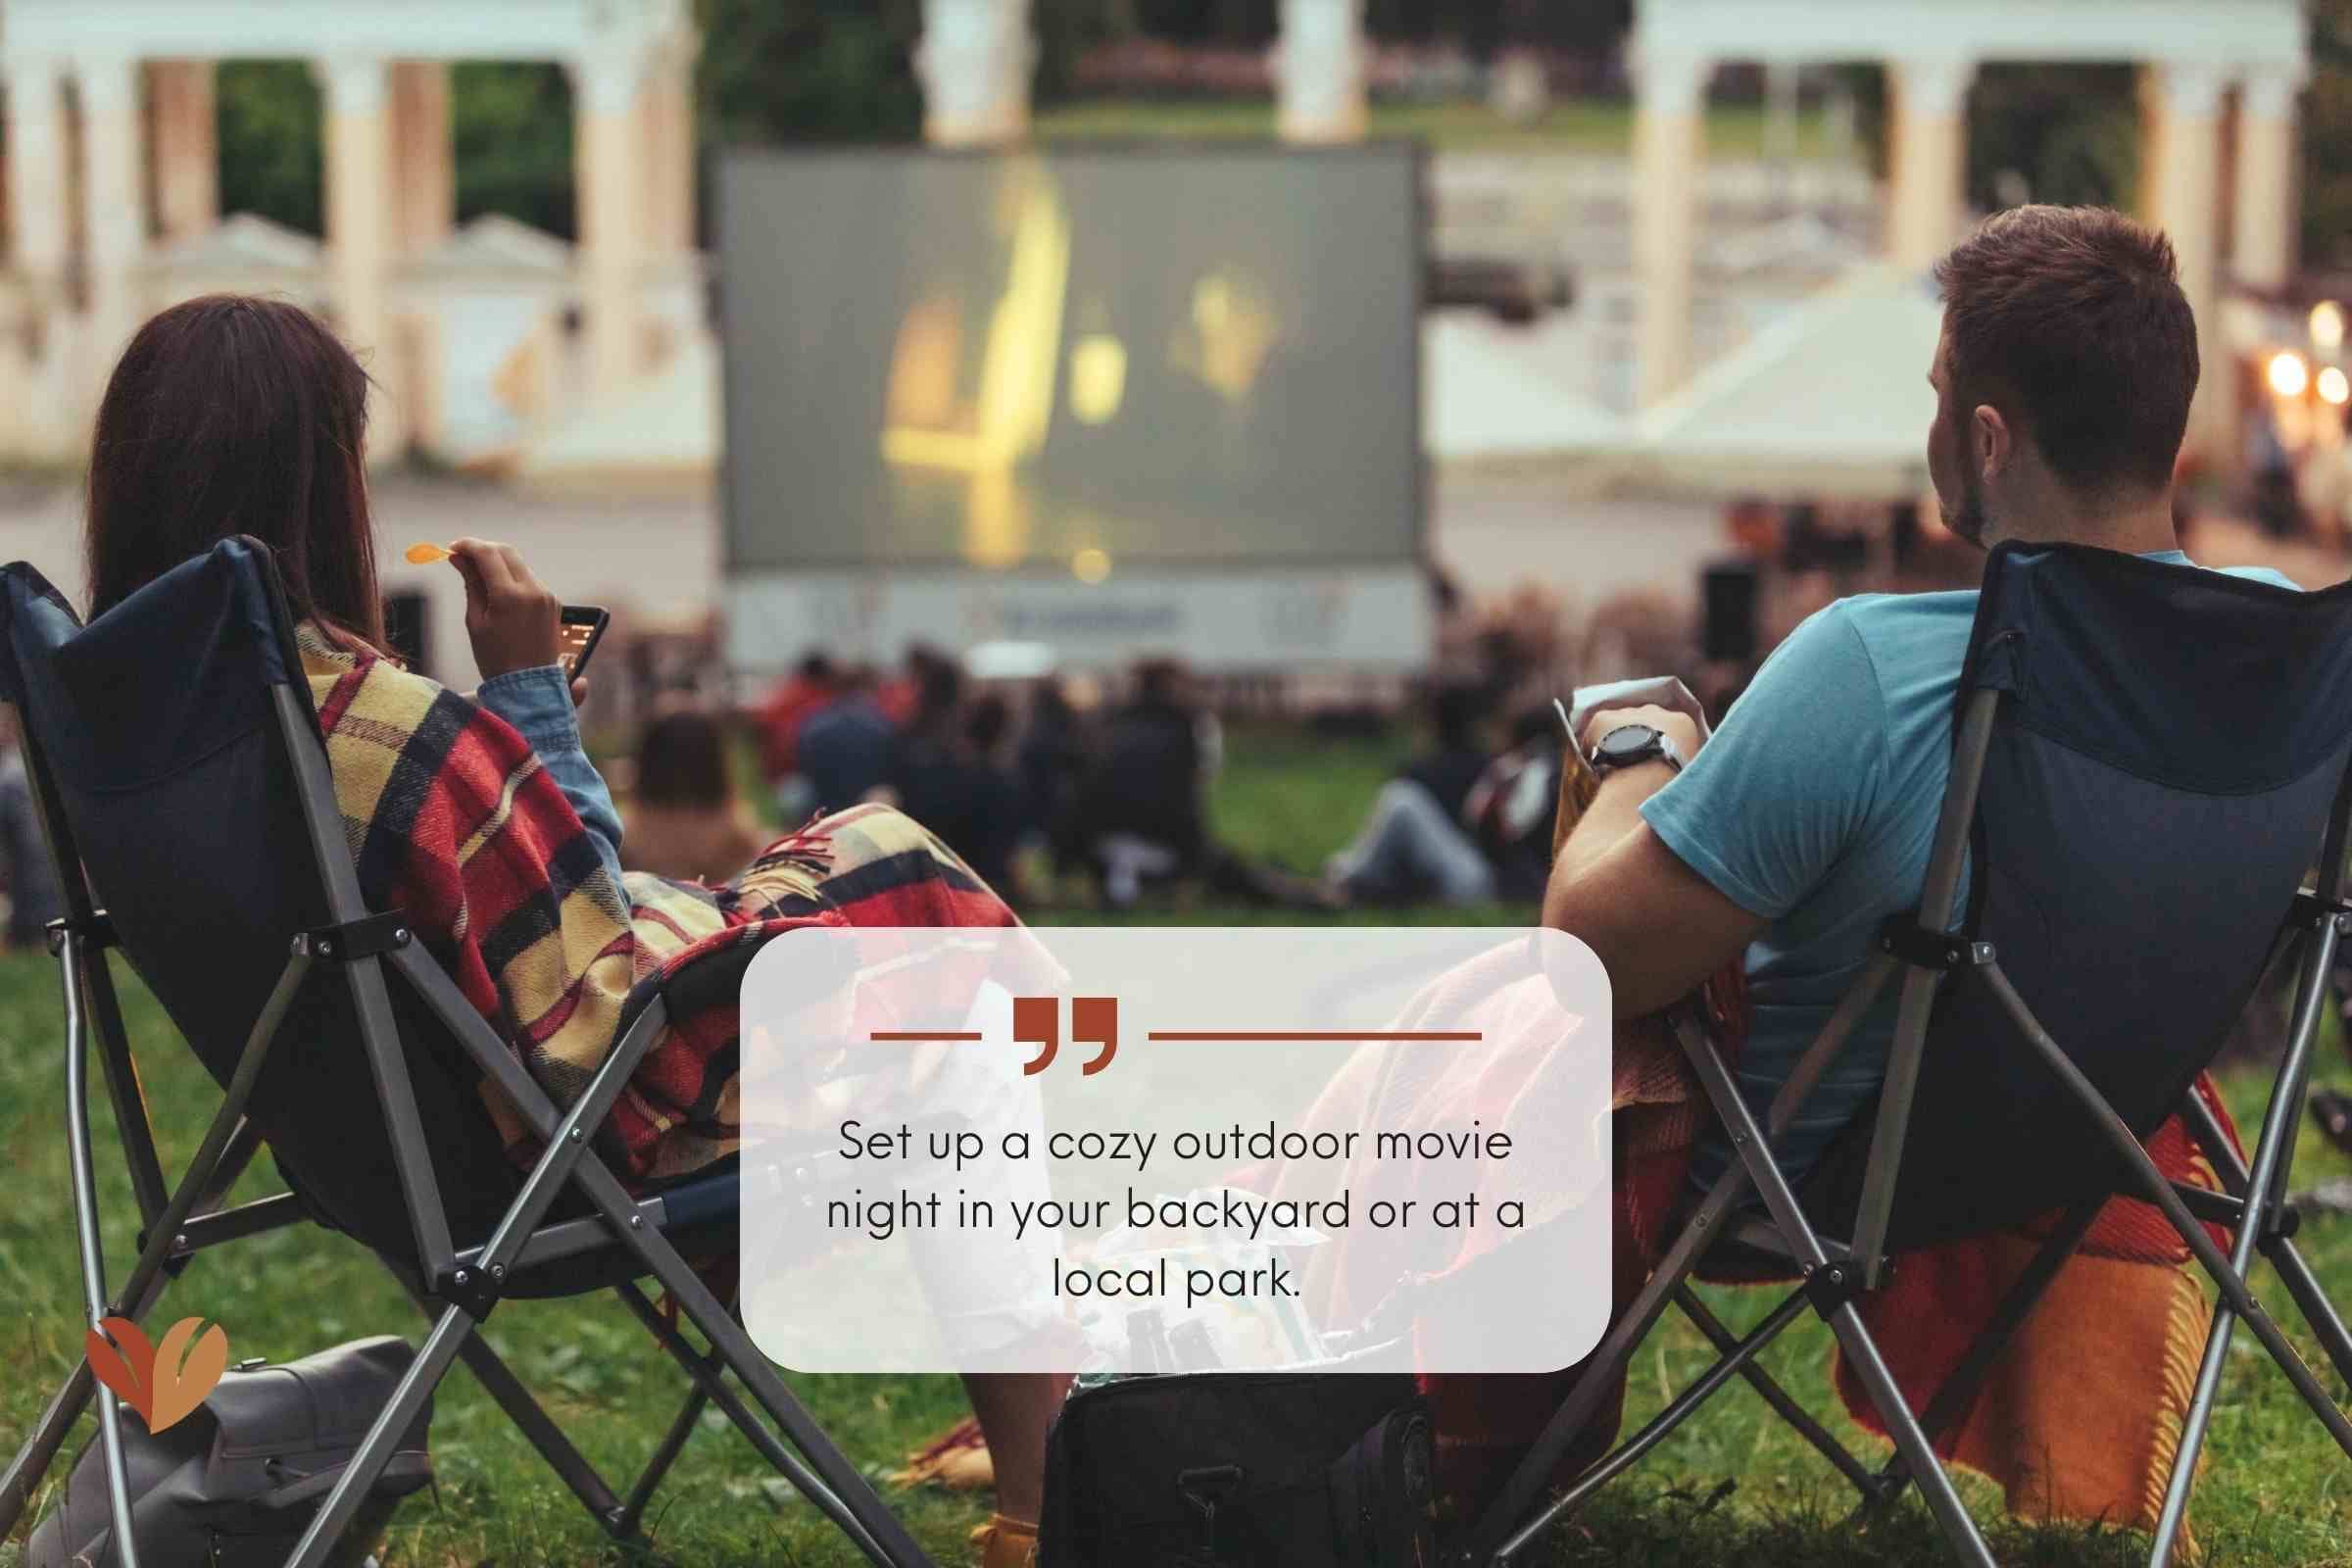 Having a outdoor movie night is also an ideal gift for her